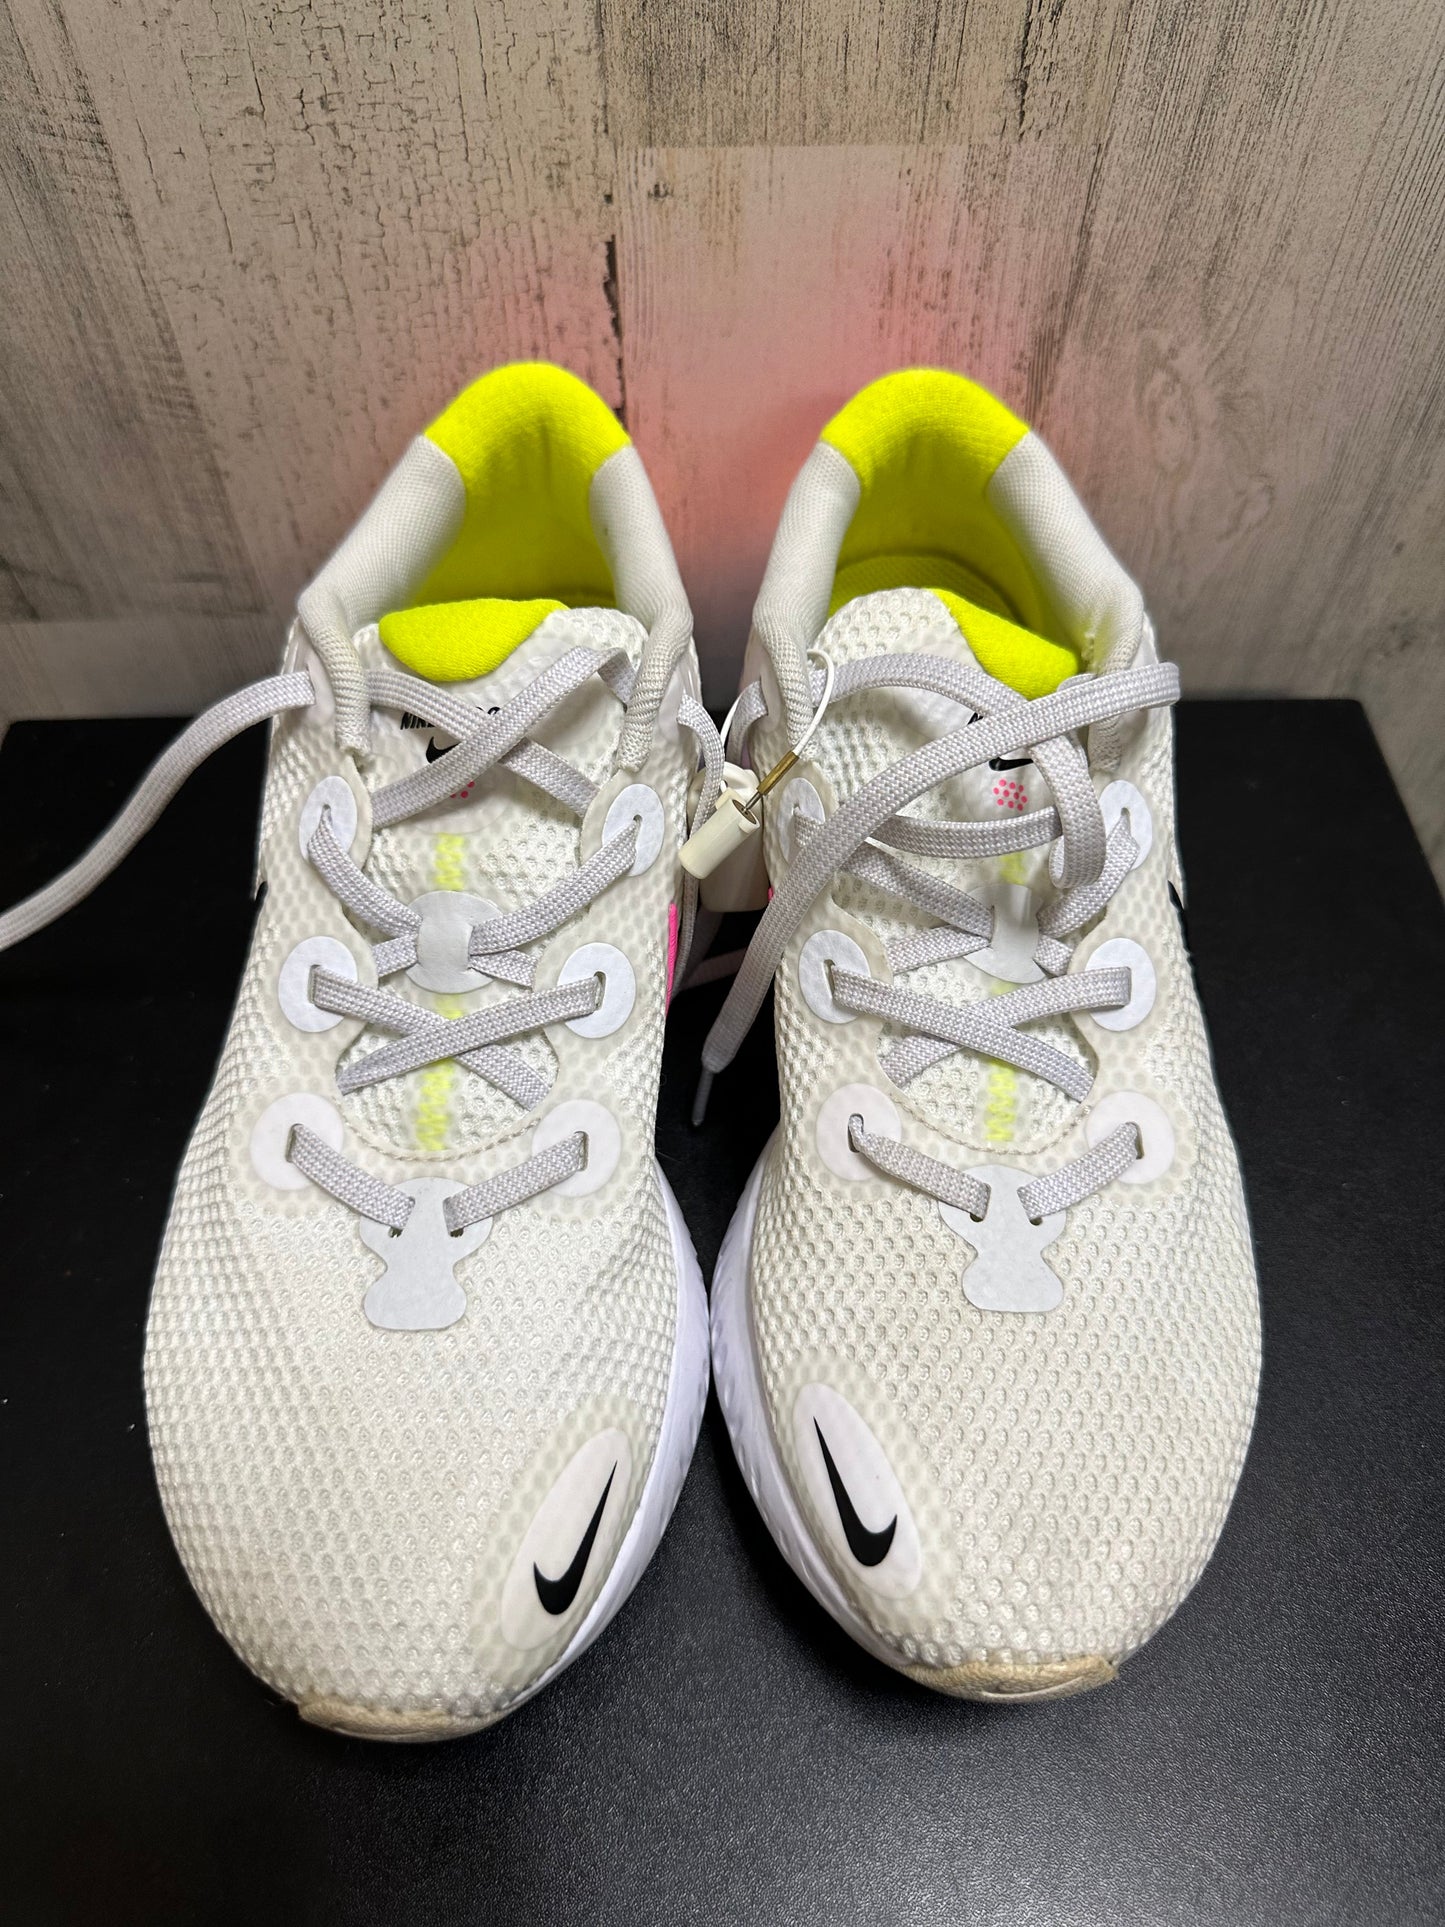 White Shoes Sneakers Nike, Size 8.5